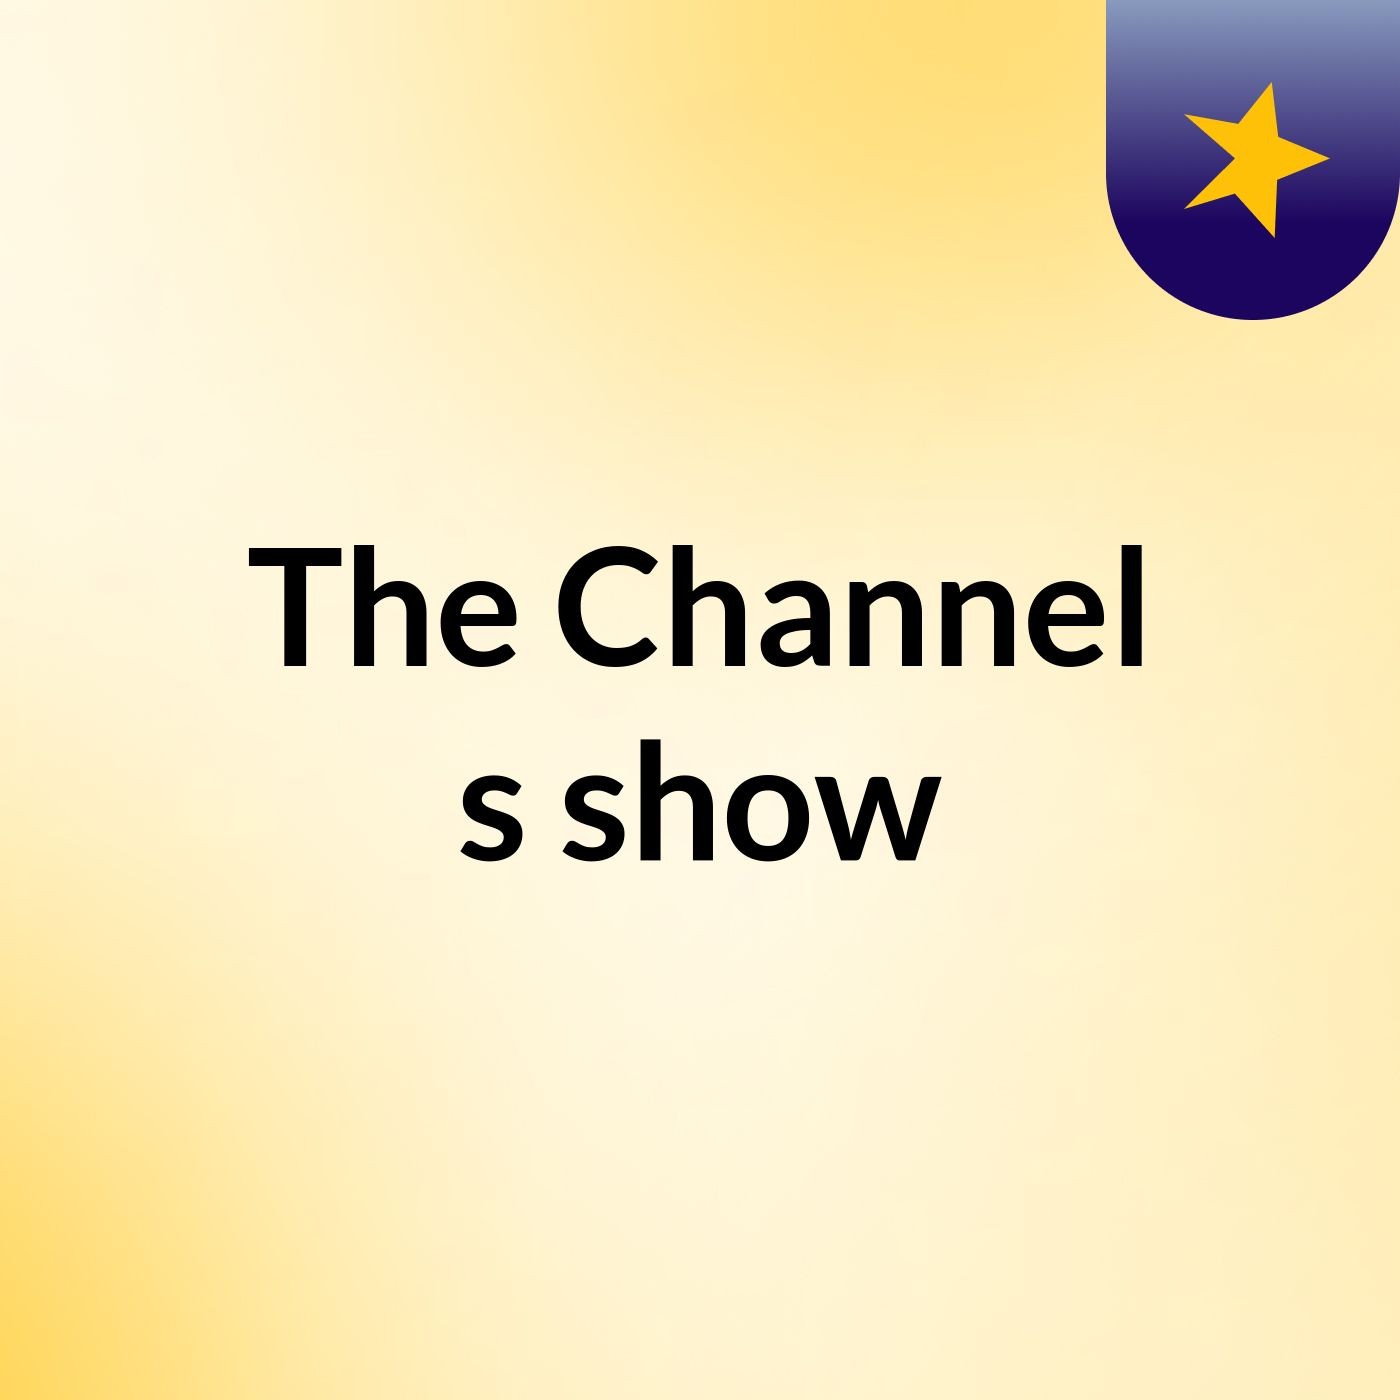 The Channel's show